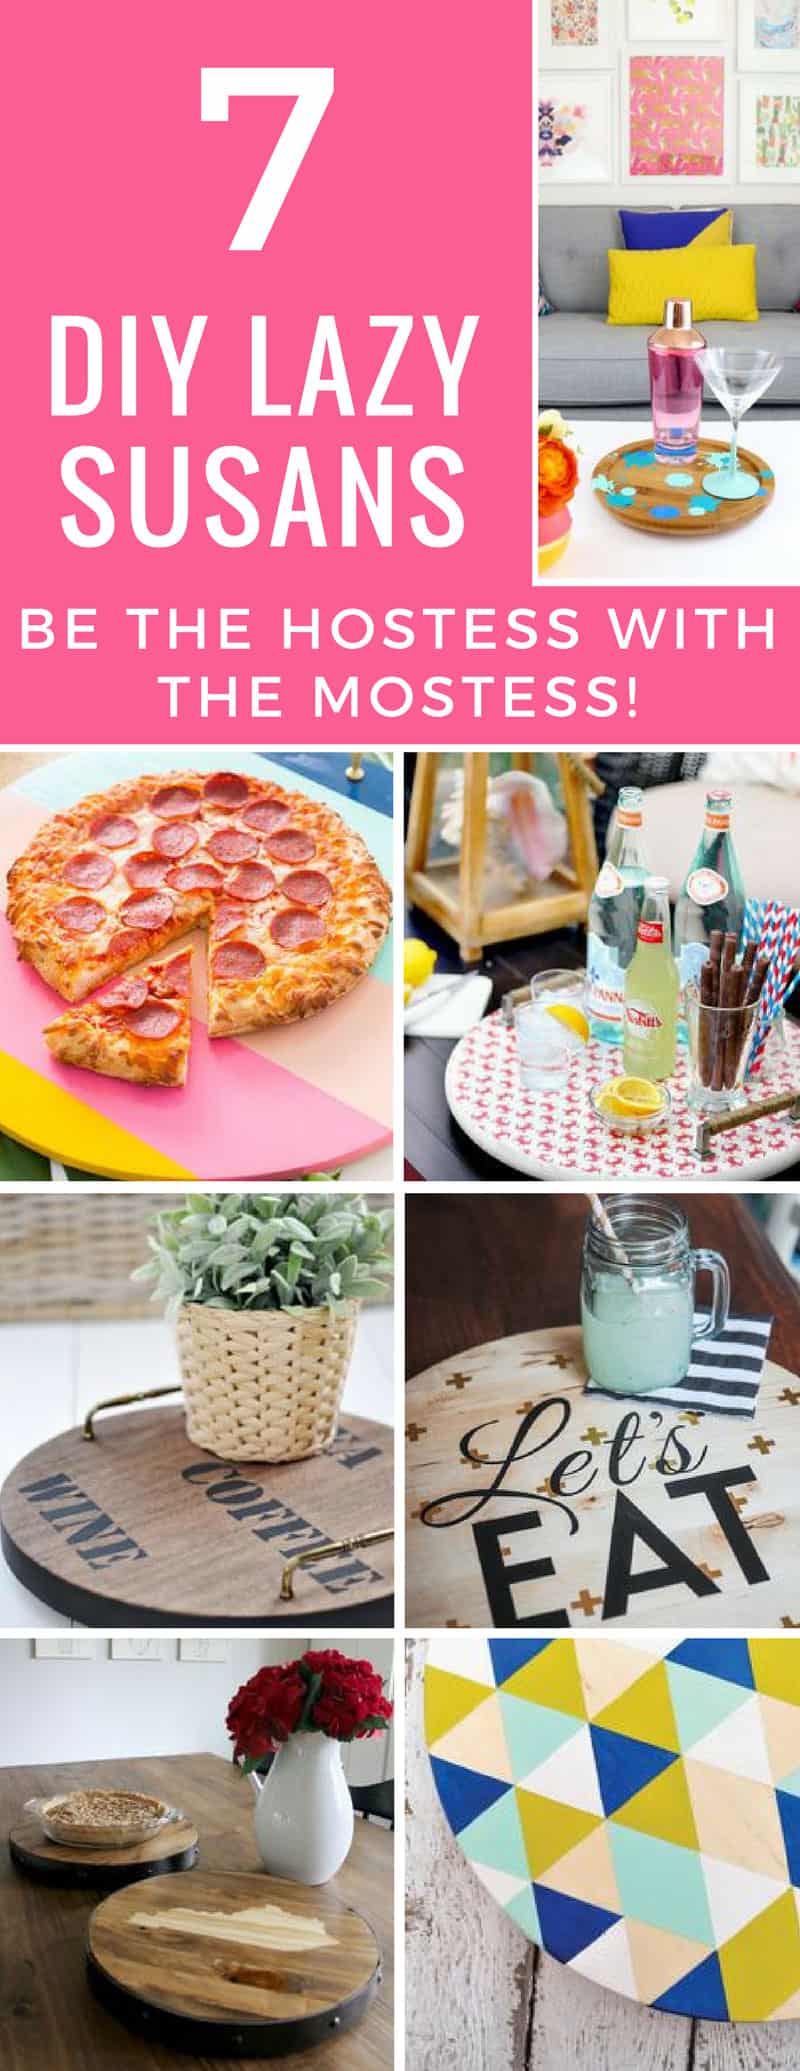 Totally in love with these DIY lazy susan ideas! I'm off to Goodwill to see if I can pick one up to makeover this weekend! Thanks for sharing!